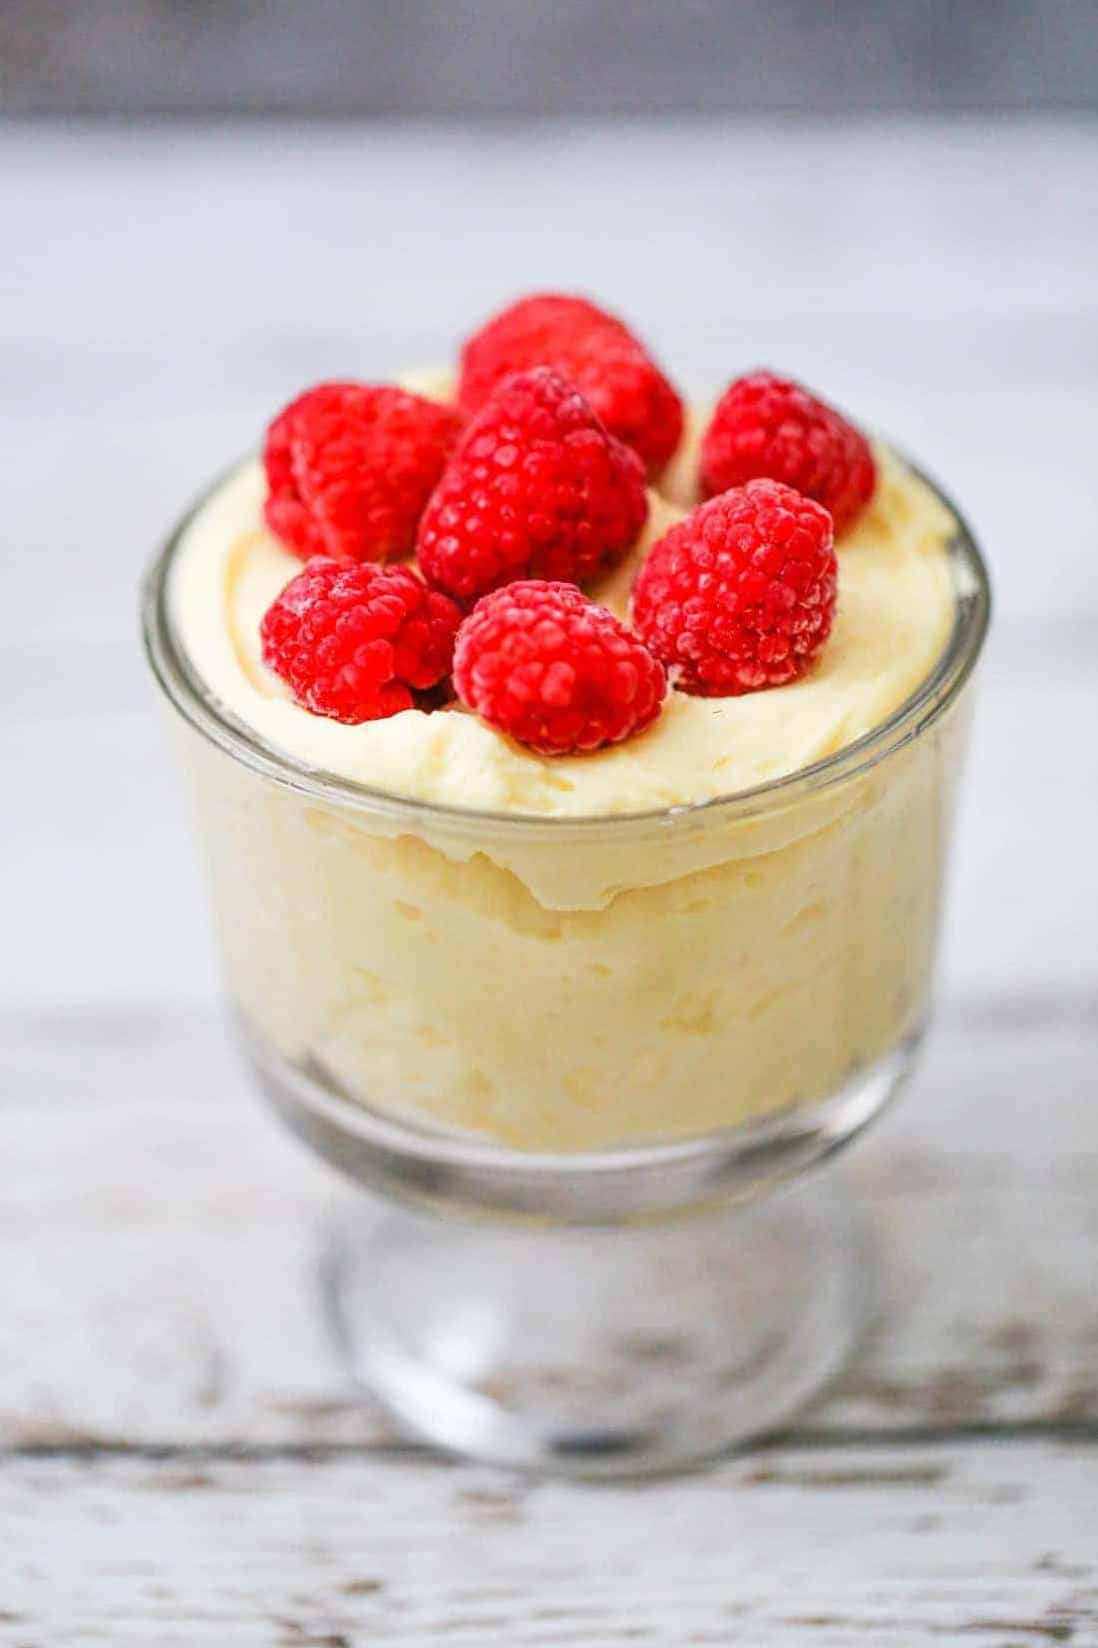  This easy-to-make pudding is perfect for a quick and healthy breakfast or snack.